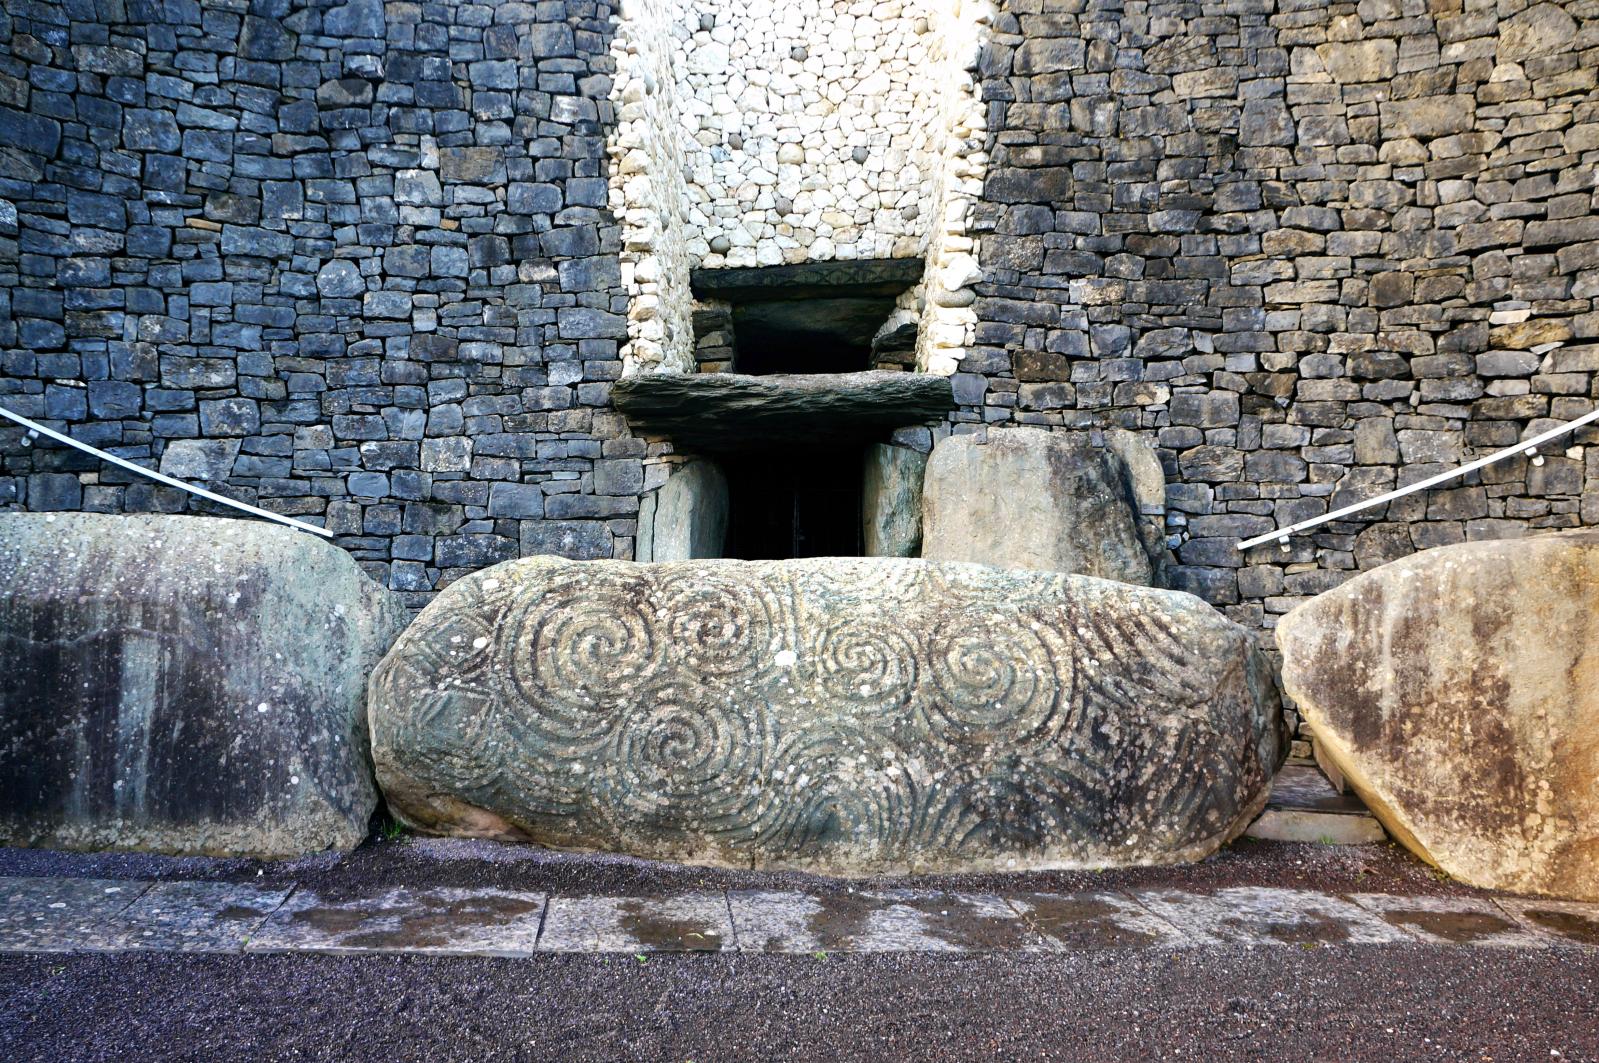 The Megaliths of Newgrange, an Outstanding Site in Ireland